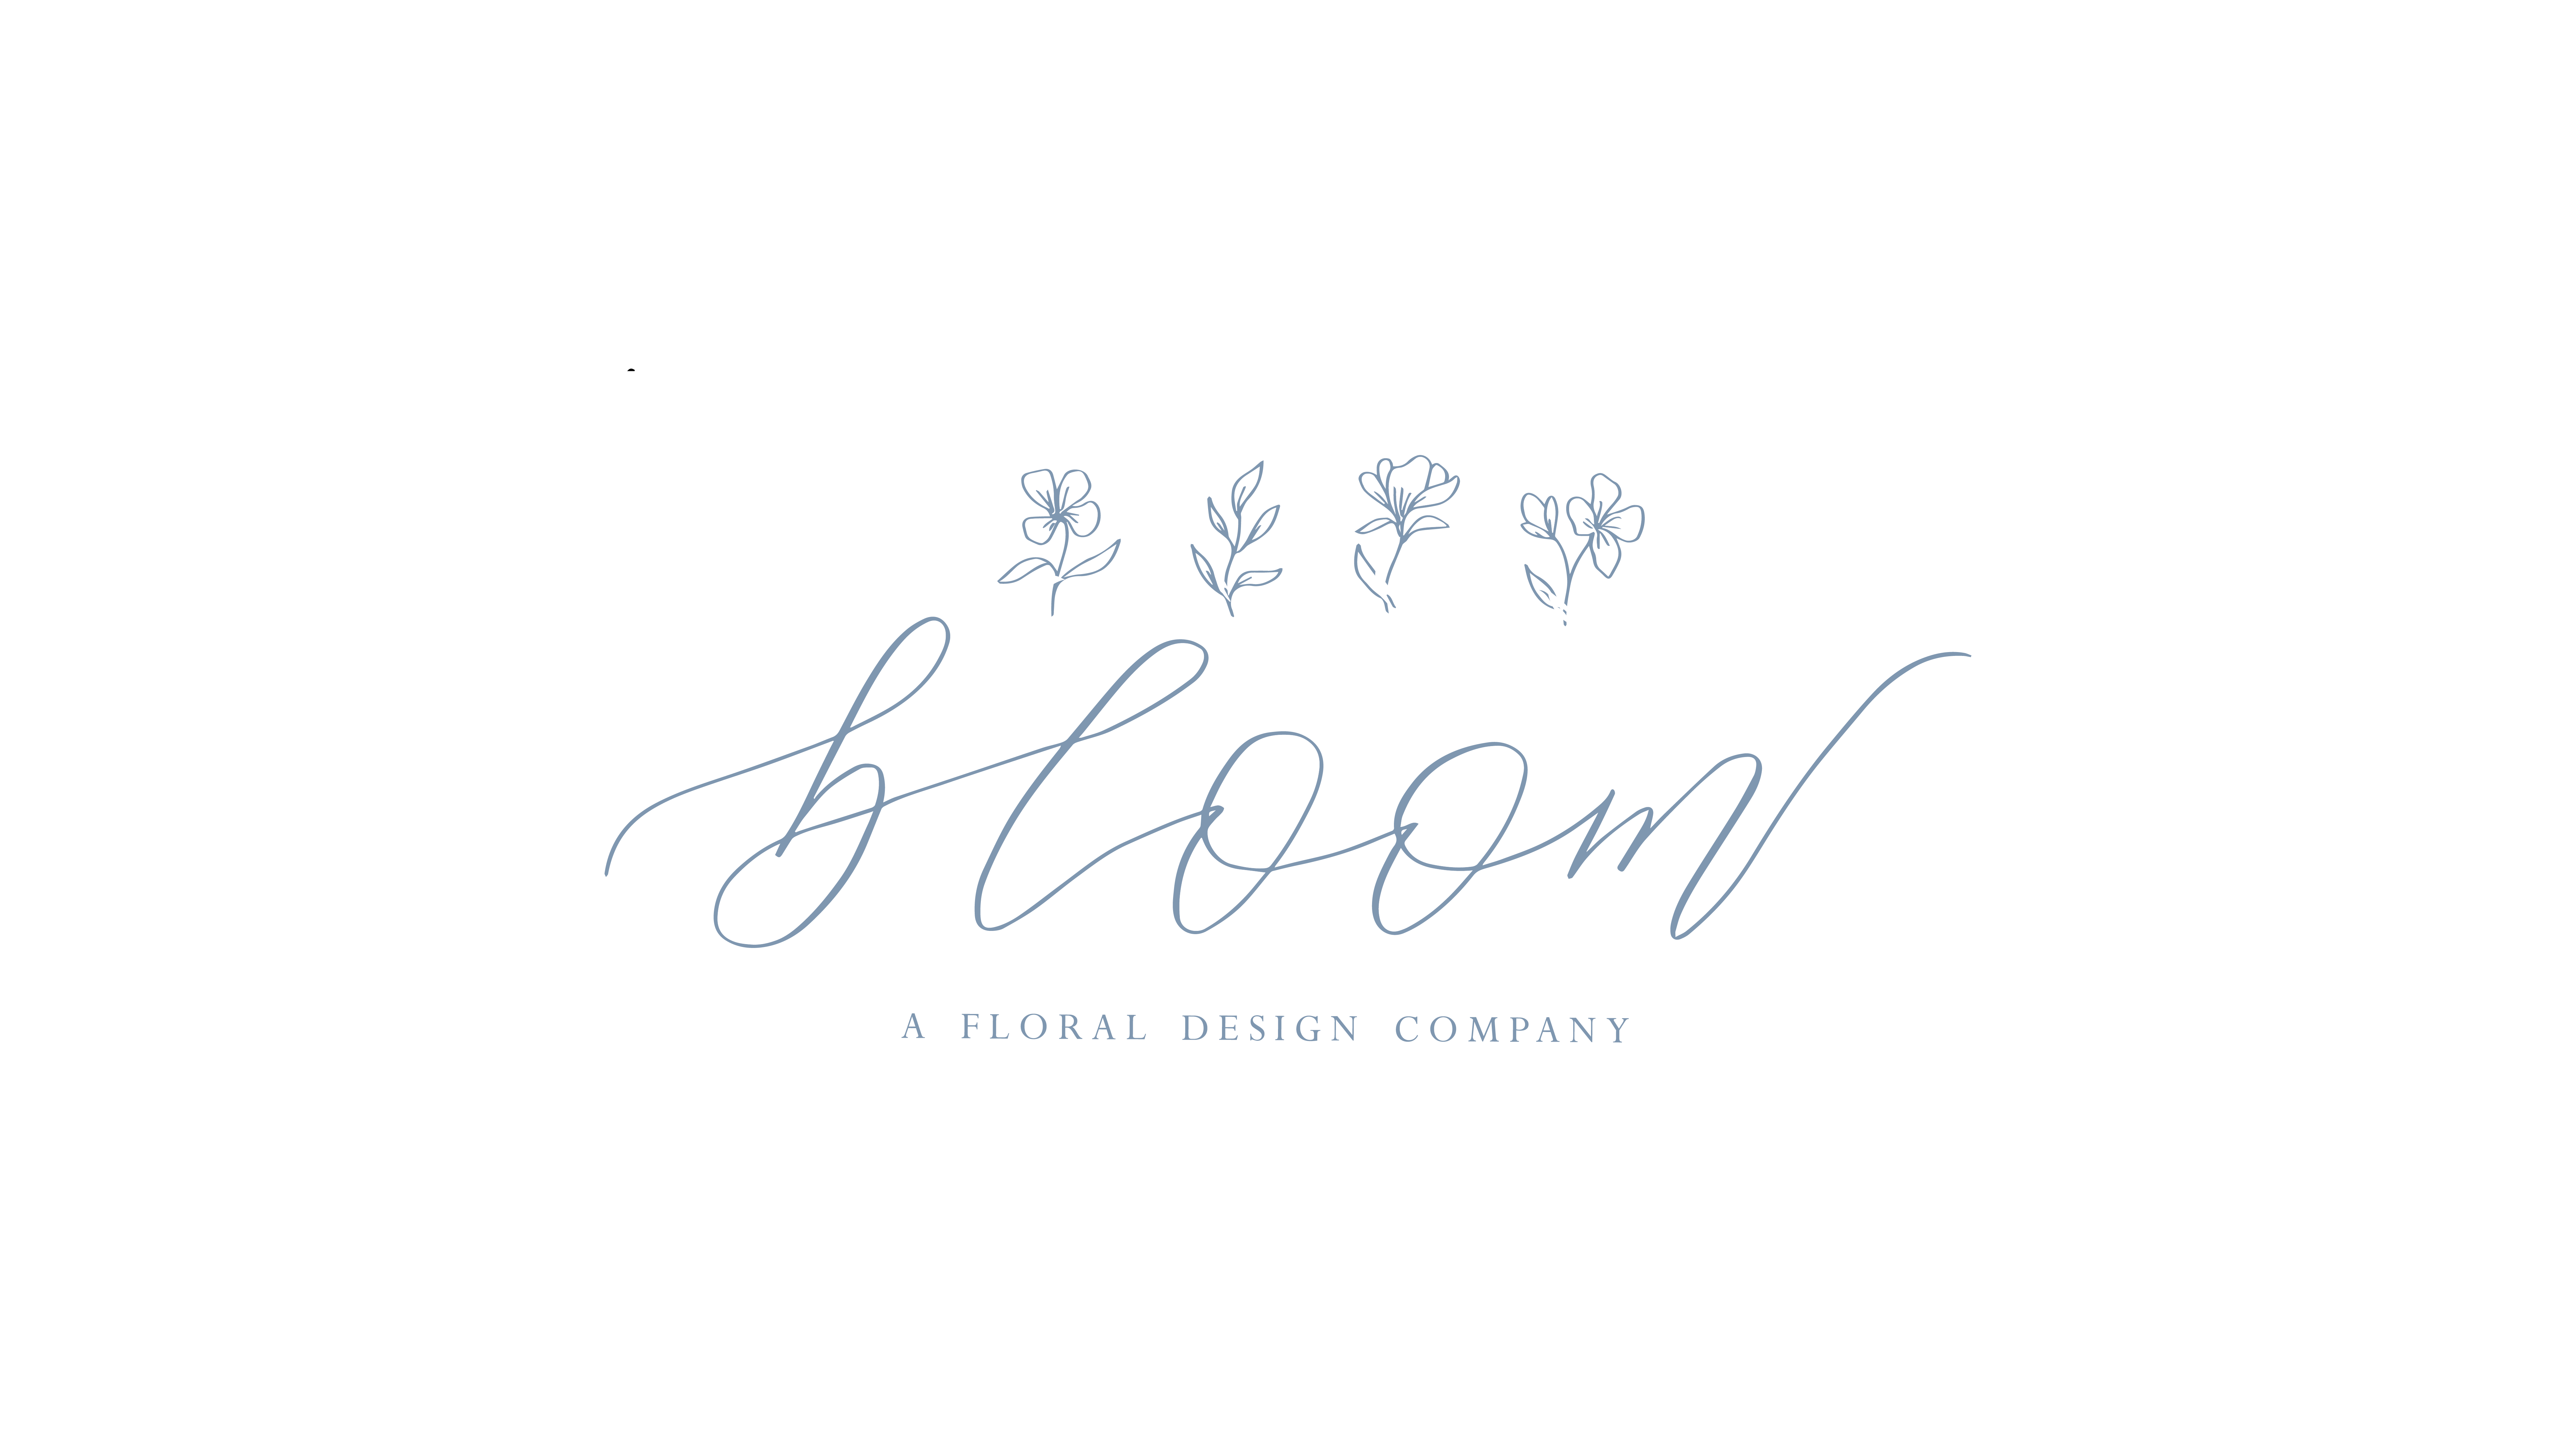 Colorful, Playful, Flower Shop Logo Design for What's in BLOOM by D_Mantra  | Design #25472291